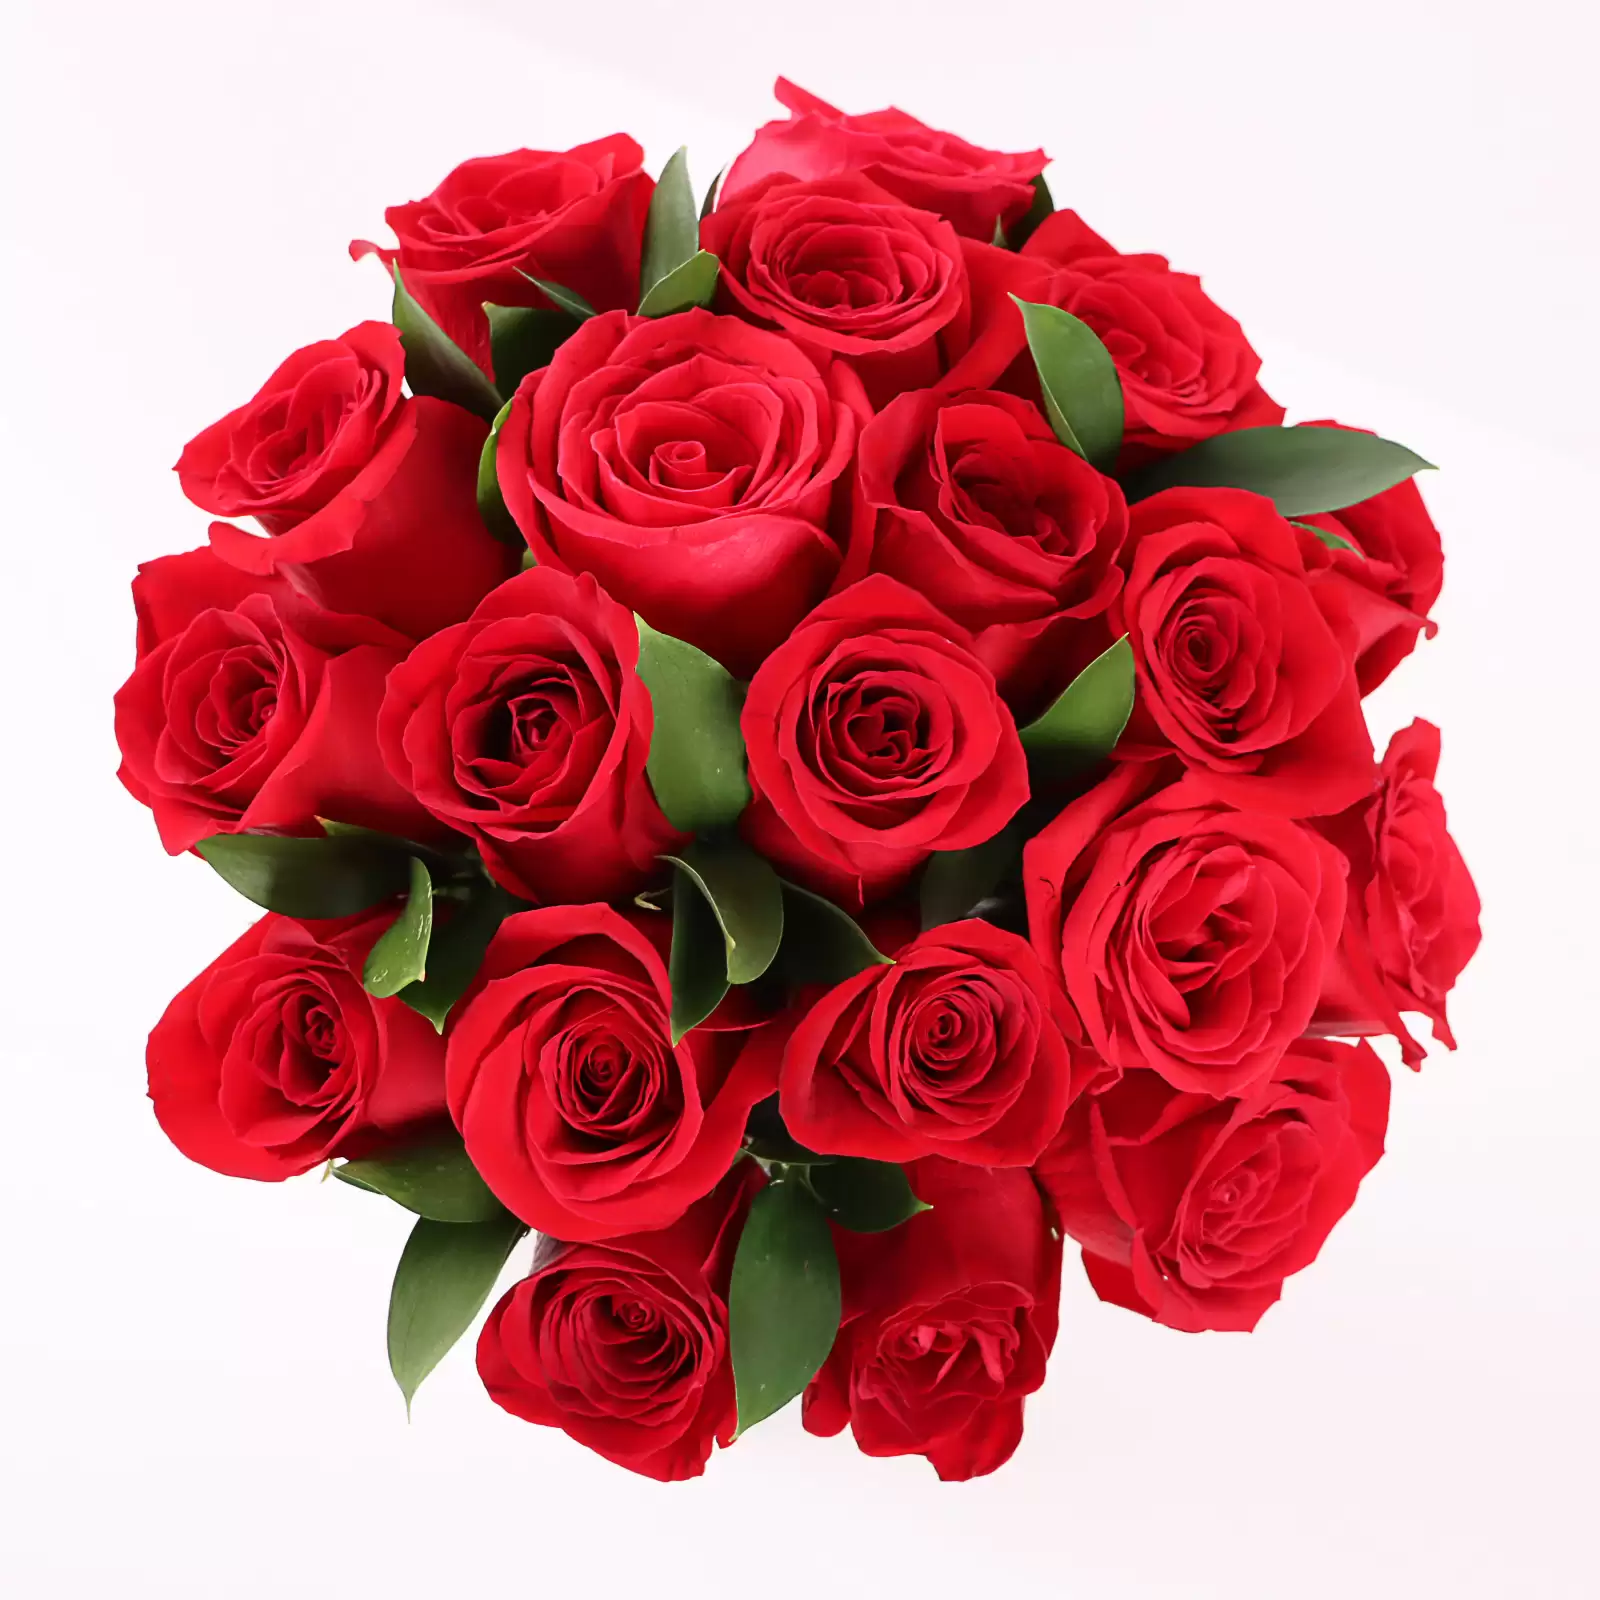 Gorgeous Roses | Red Roses Delivery In Bahrain - Flora D'lite